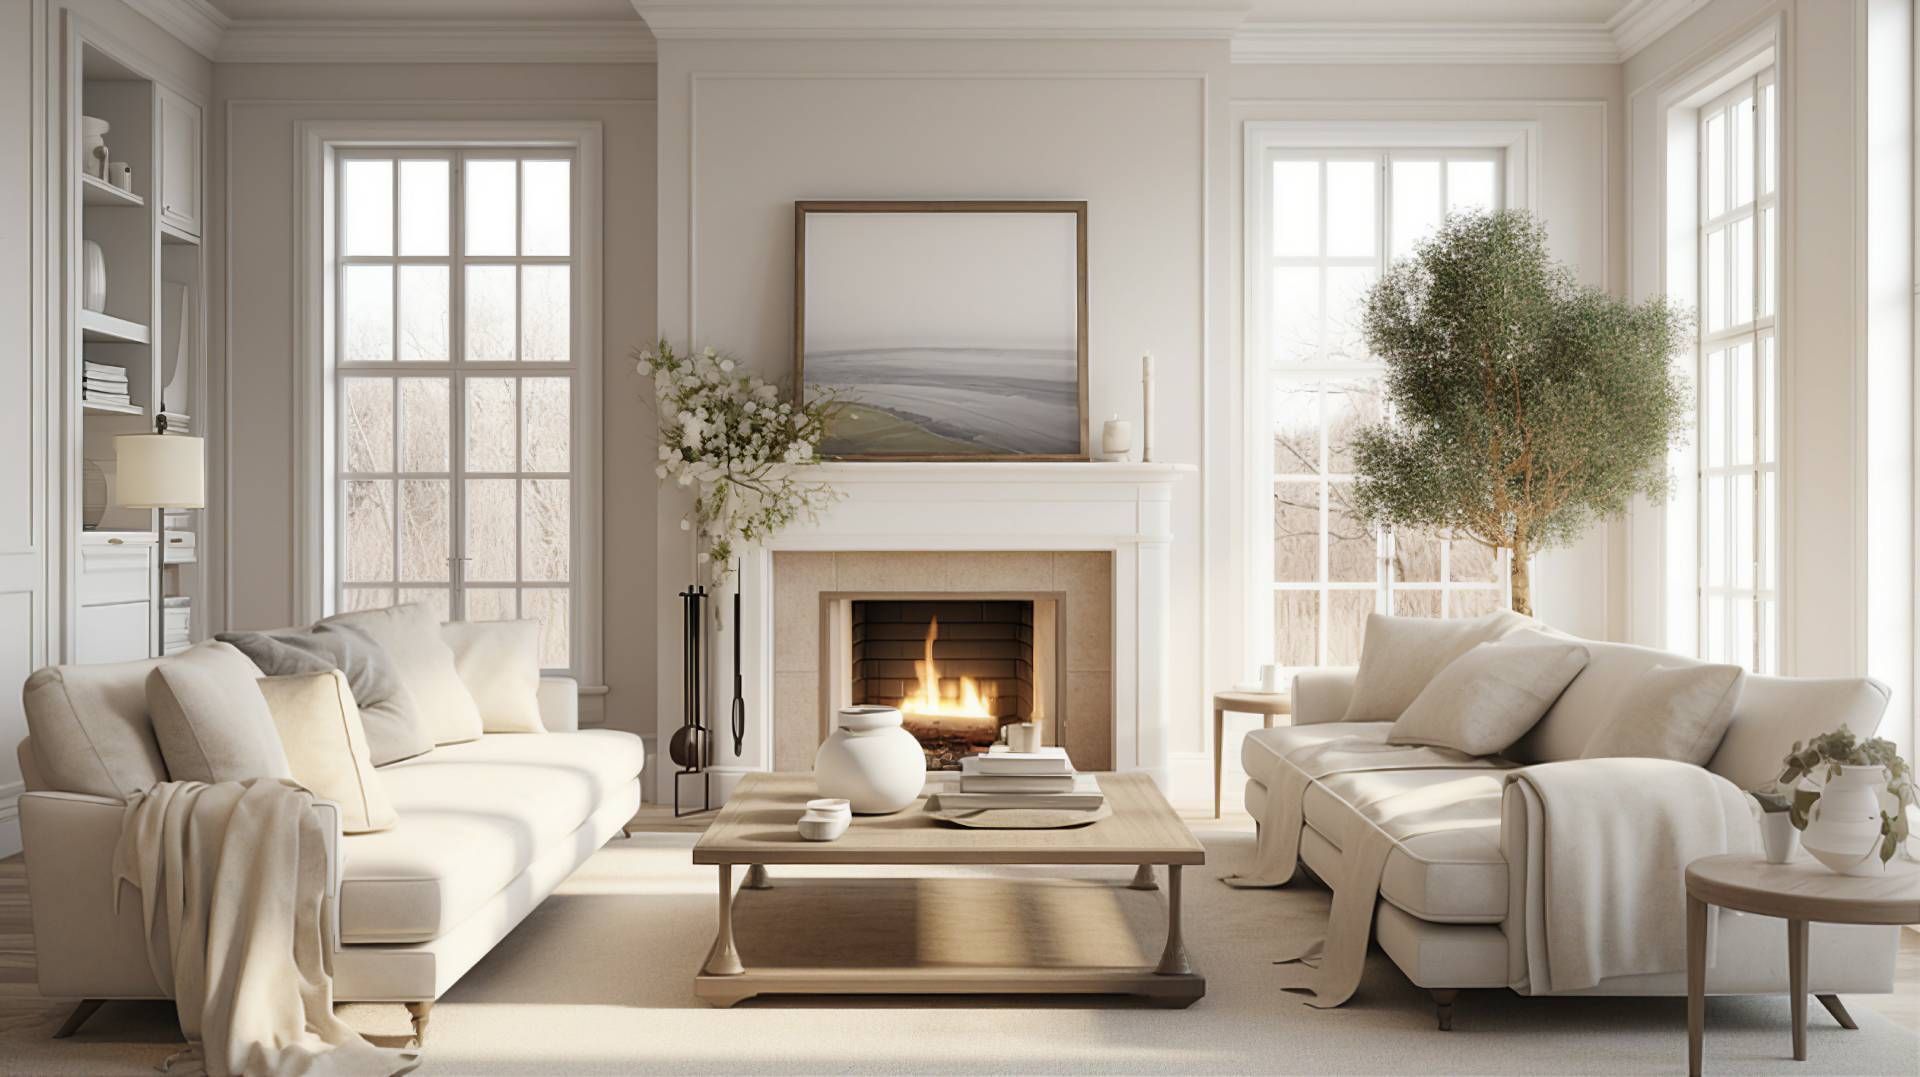 Elegant living room with a soothing neutral color scheme